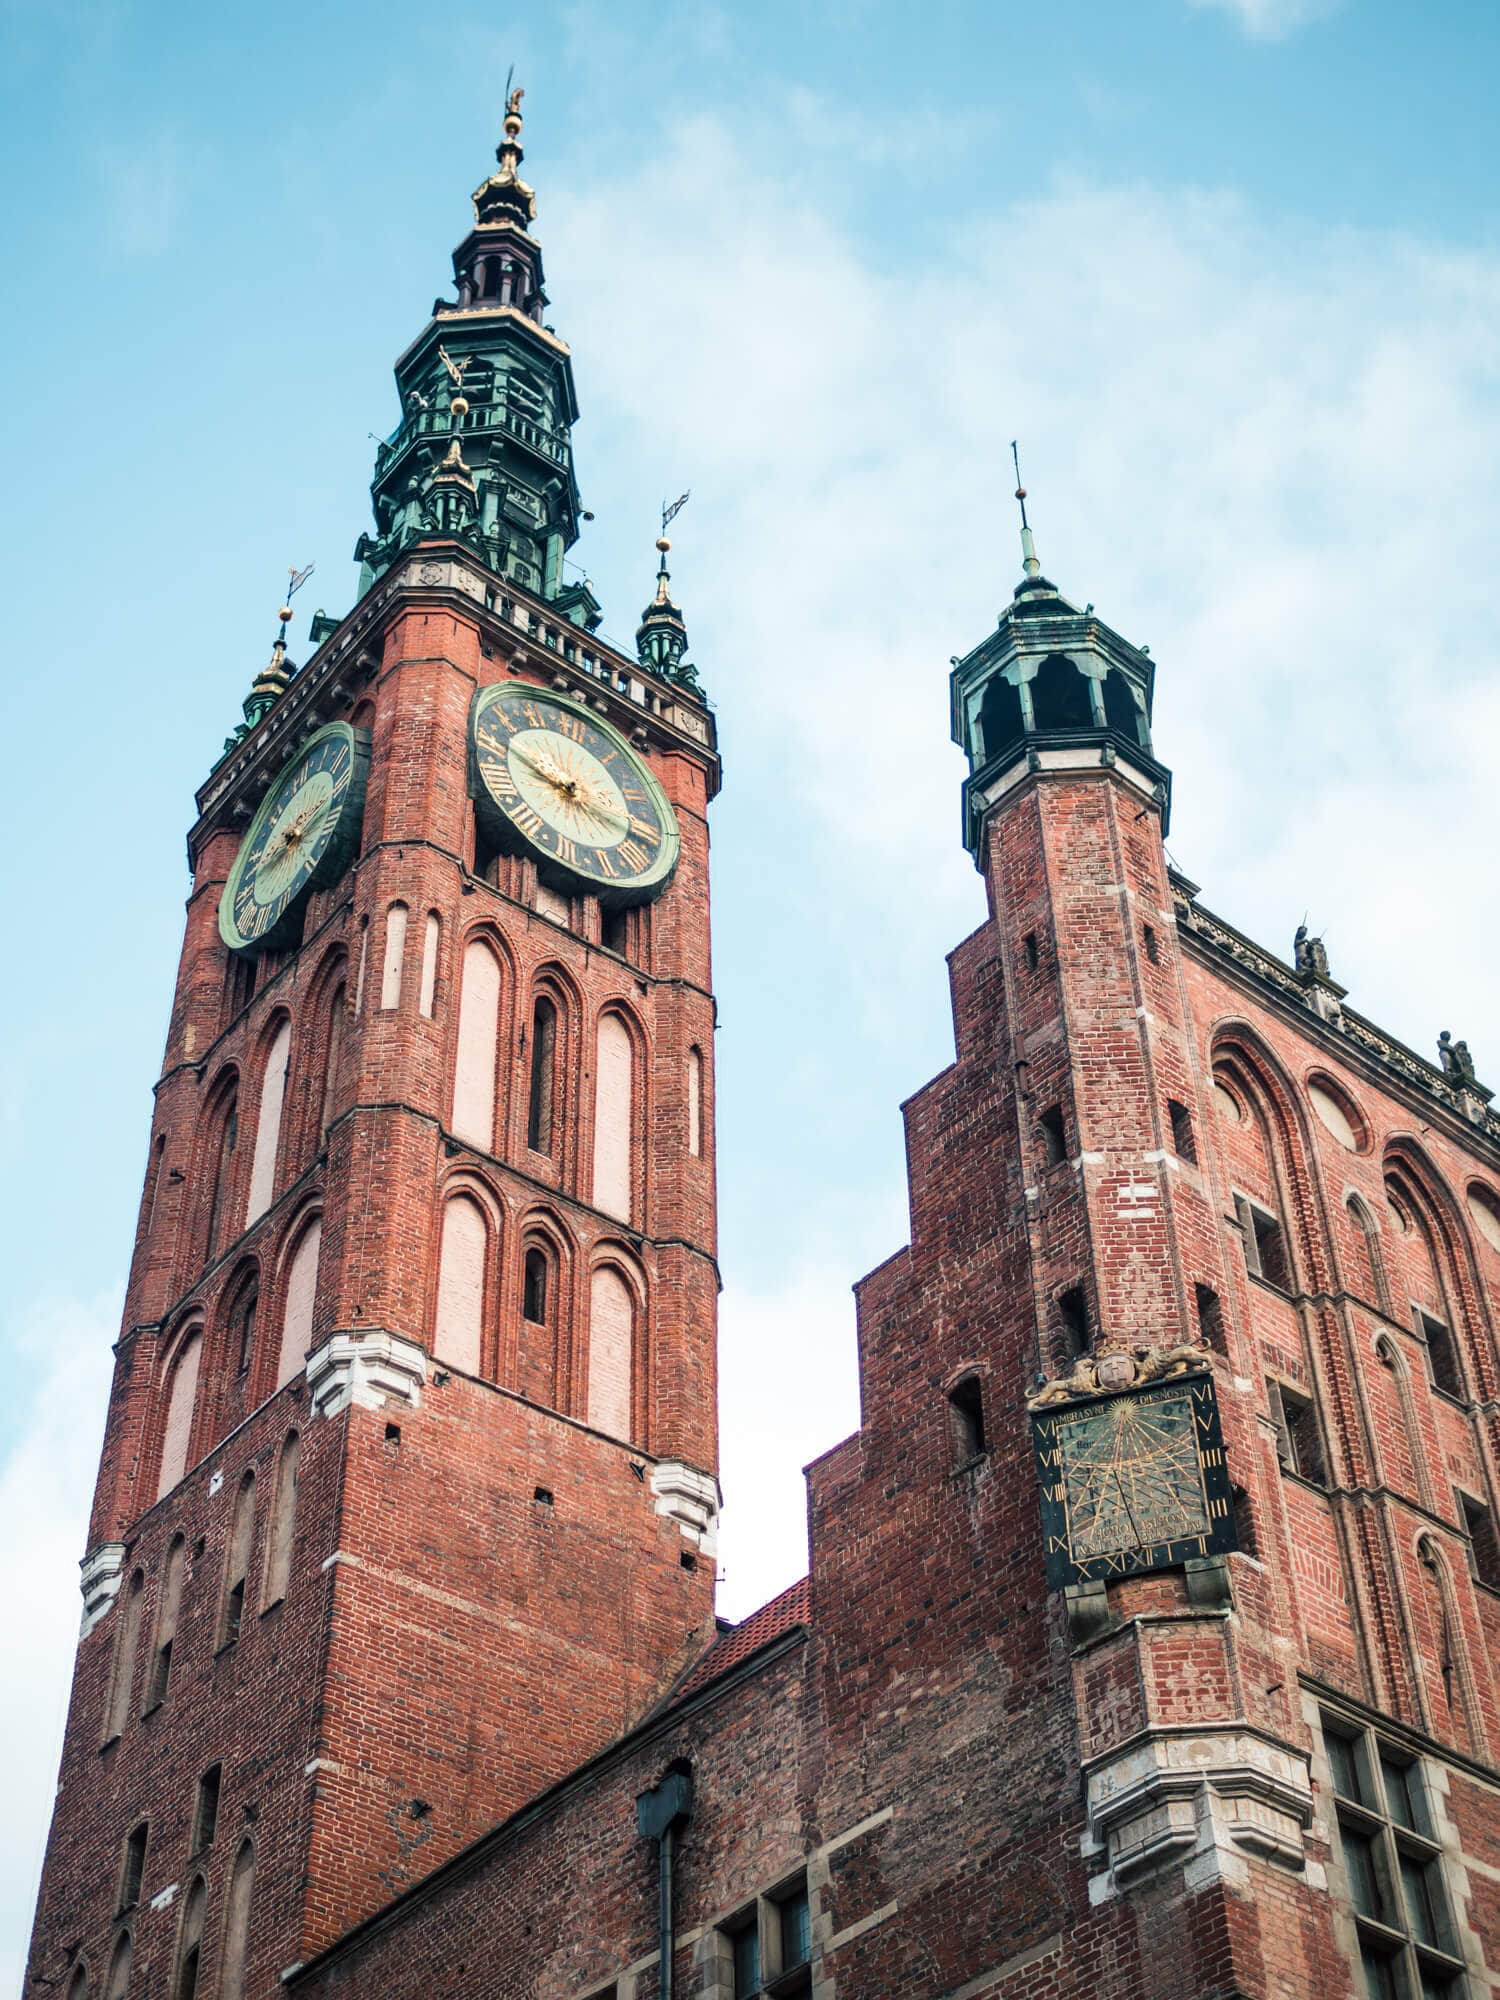 View from below of the clock tower on Gdansk Town Hall, built from red bricks, set against a blue sky, during two days in Gdansk.